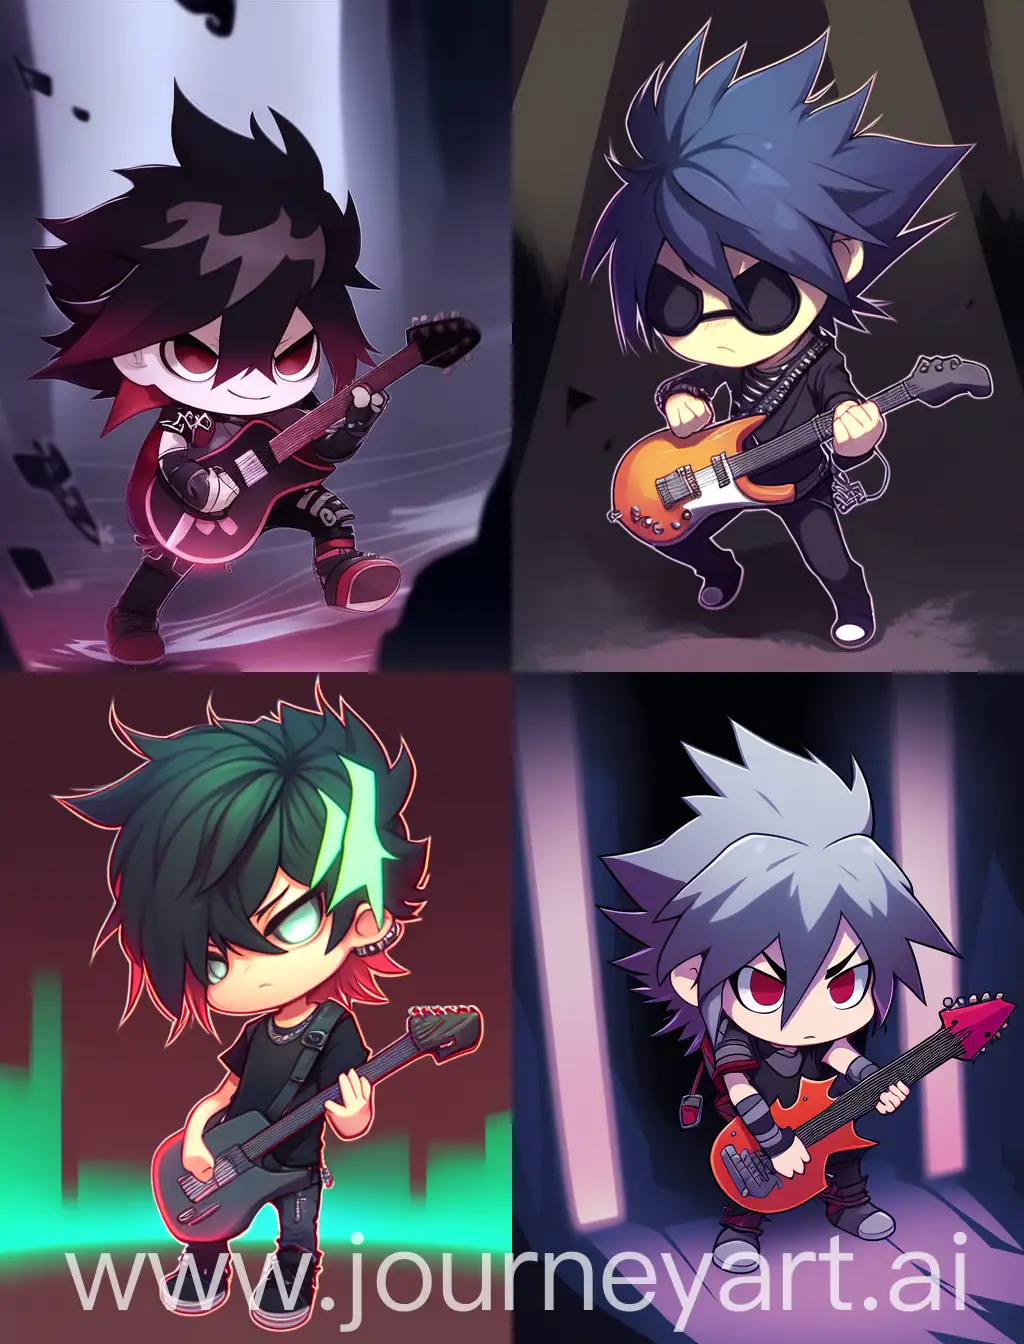 Chibi-Emo-Guy-Playing-Guitar-in-Spooky-Anime-Style